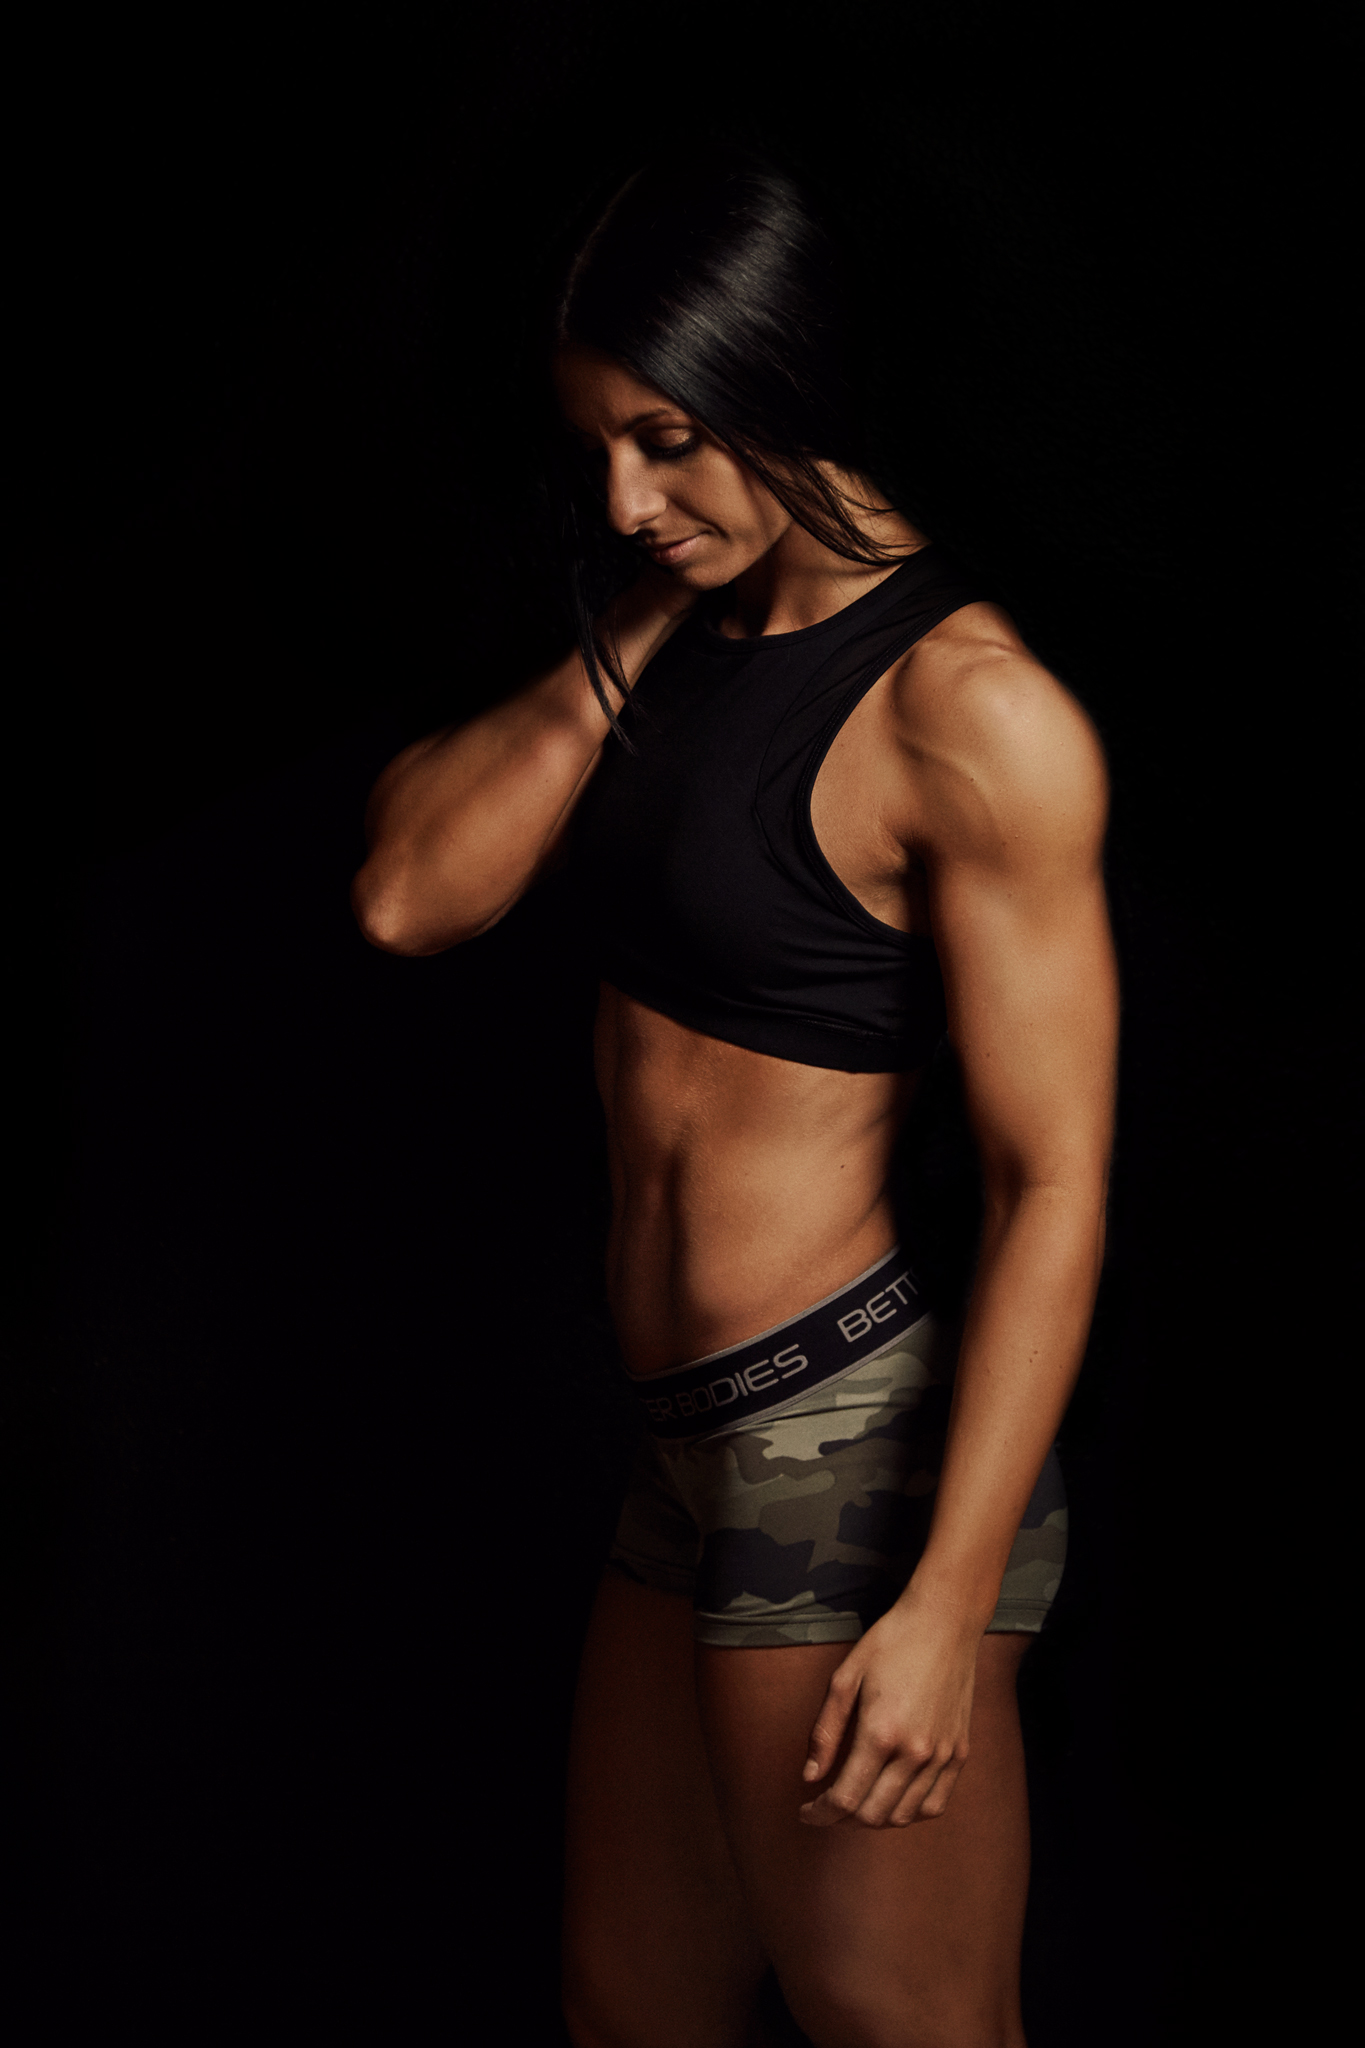 Fitness Competitor Photoshoot - April Bleicher